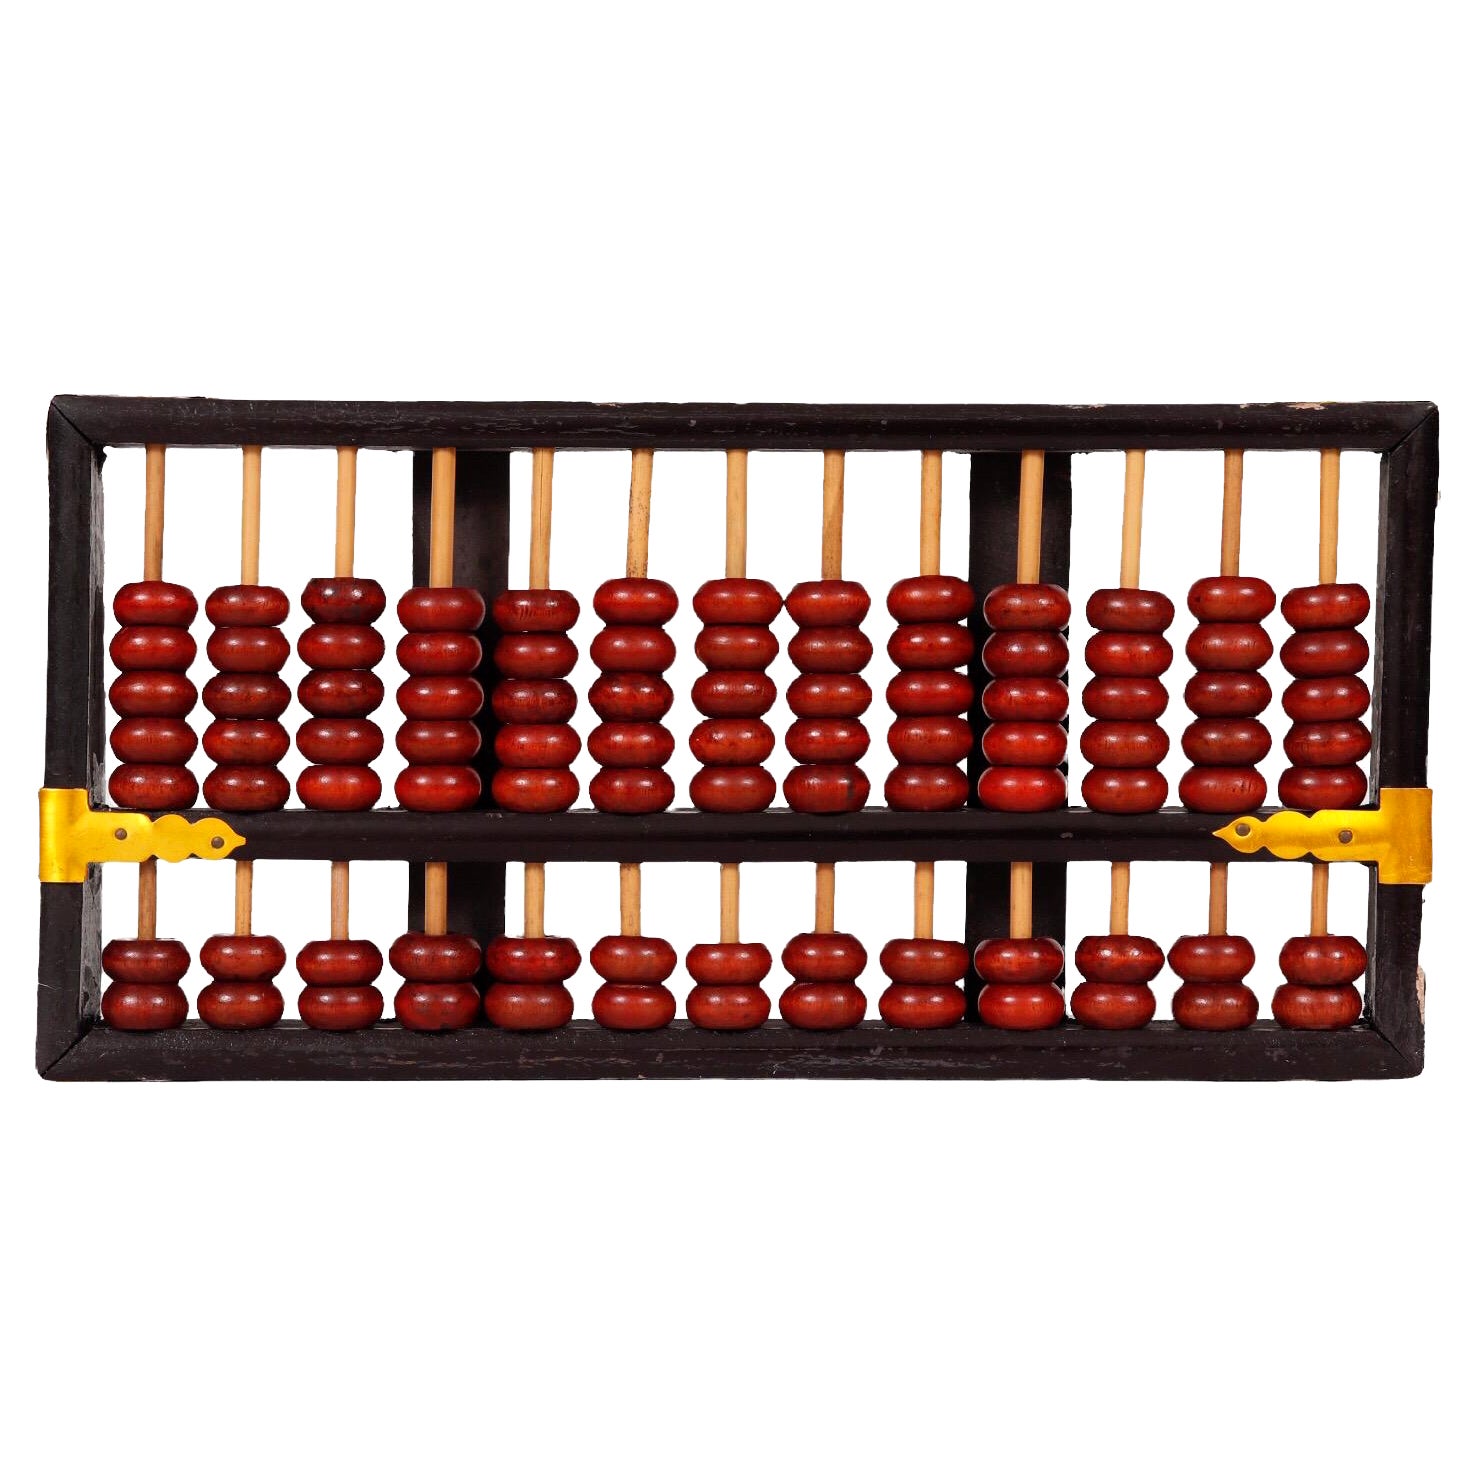 Chinese Abacus Made by Lotus Flower